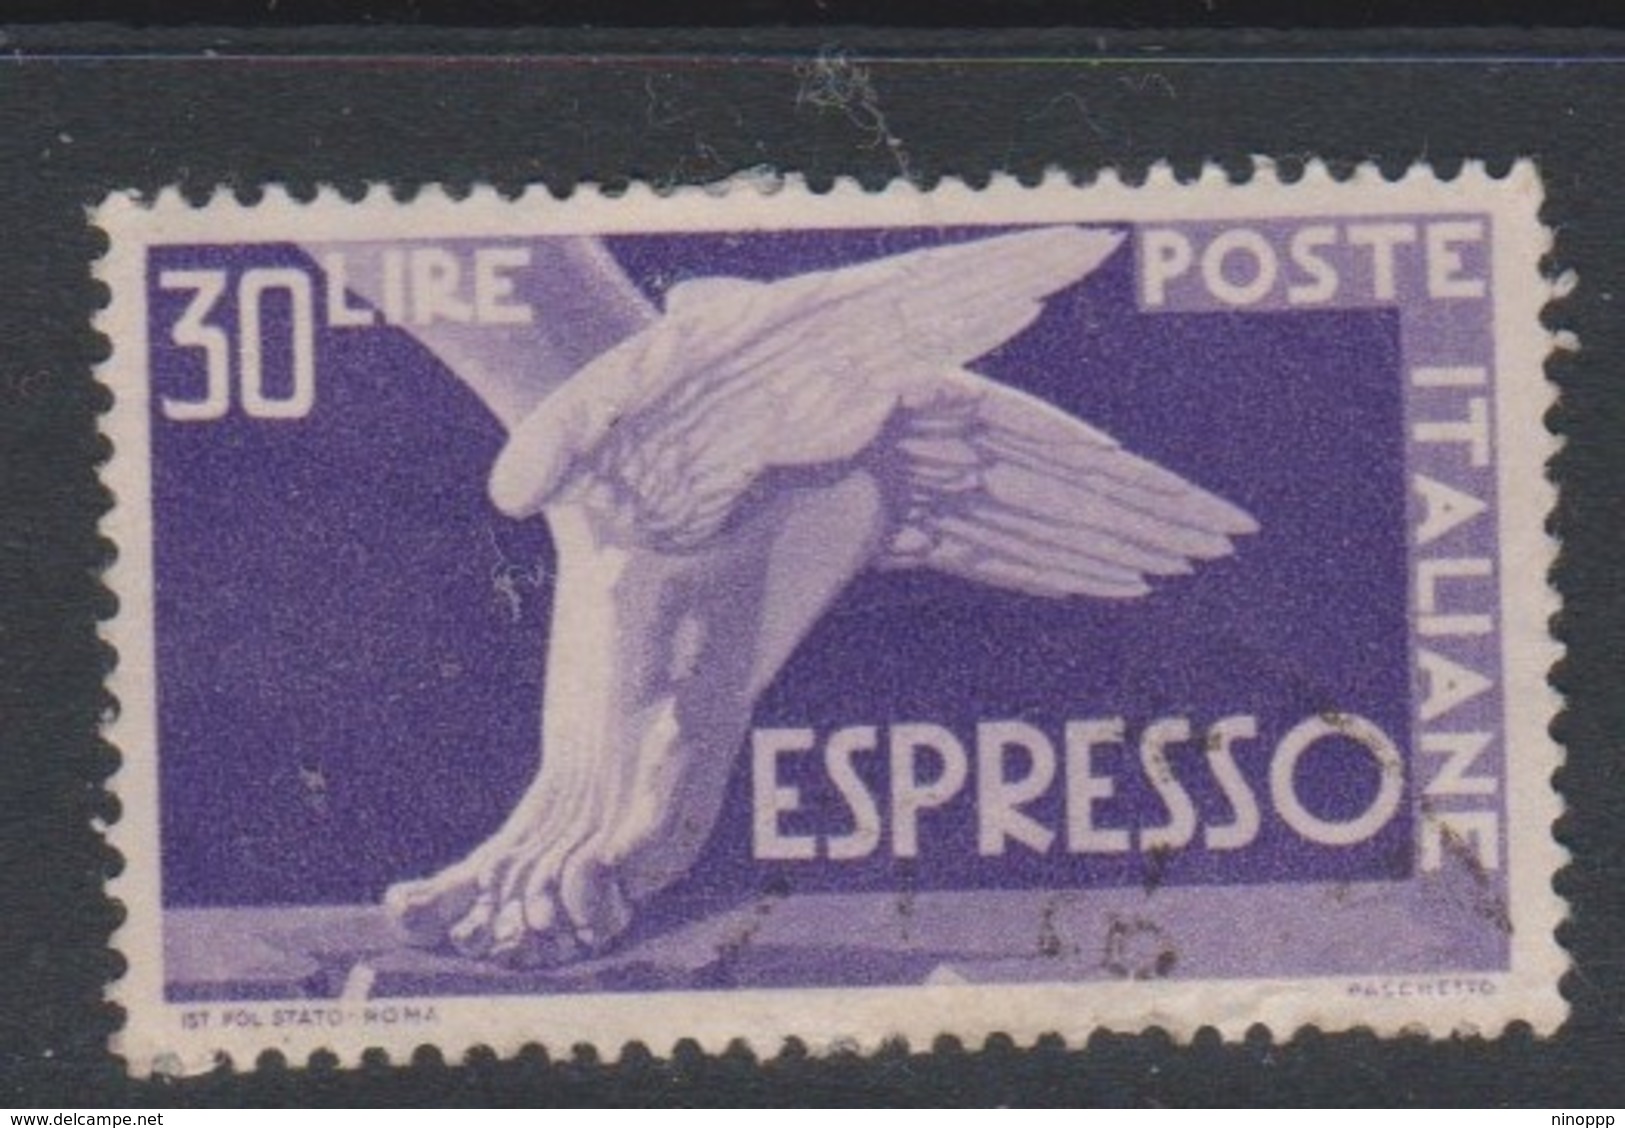 Italy E 29 1945-52  Special Delivery Stamp,30 Lire Violet,used - Express/pneumatic Mail